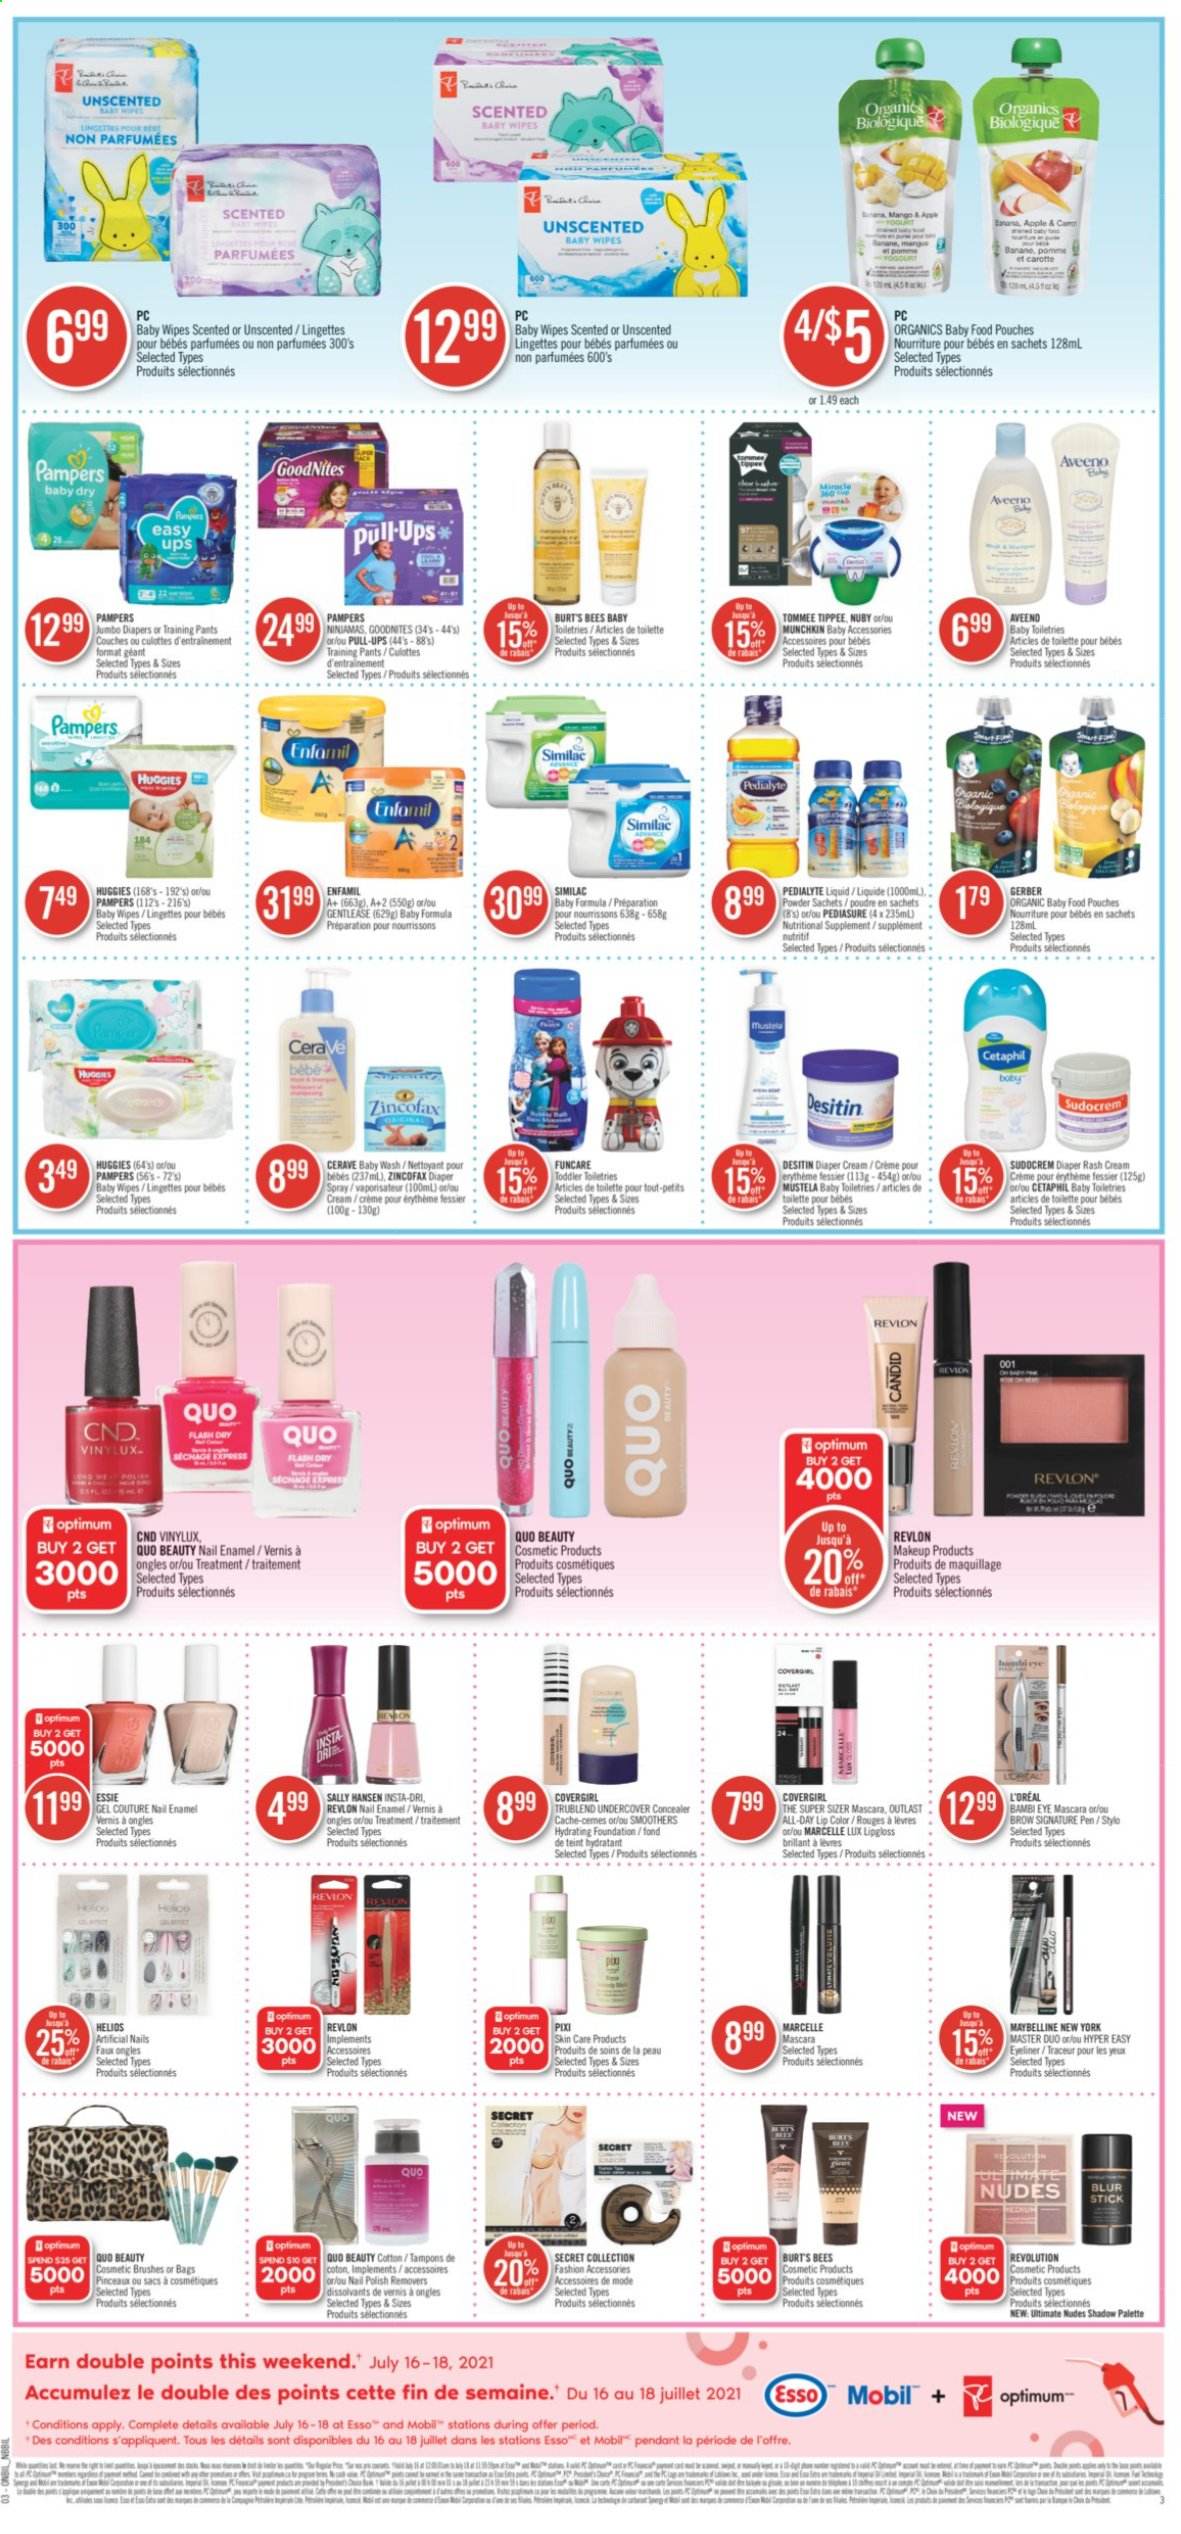 thumbnail - Shoppers Drug Mart Flyer - July 17, 2021 - July 23, 2021 - Sales products - Gerber, Enfamil, Similac, organic baby food, wipes, pants, baby wipes, nappies, baby pants, Aveeno, Lux, tampons, CeraVe, L’Oréal, Revlon, bag, nail enamel, polish, corrector, lip color, makeup, eyeliner, pendant, nutritional supplement, Sudocrem, Desitin, LG, mascara, Maybelline, Sally Hansen, Huggies, Palette, Pampers. Page 3.